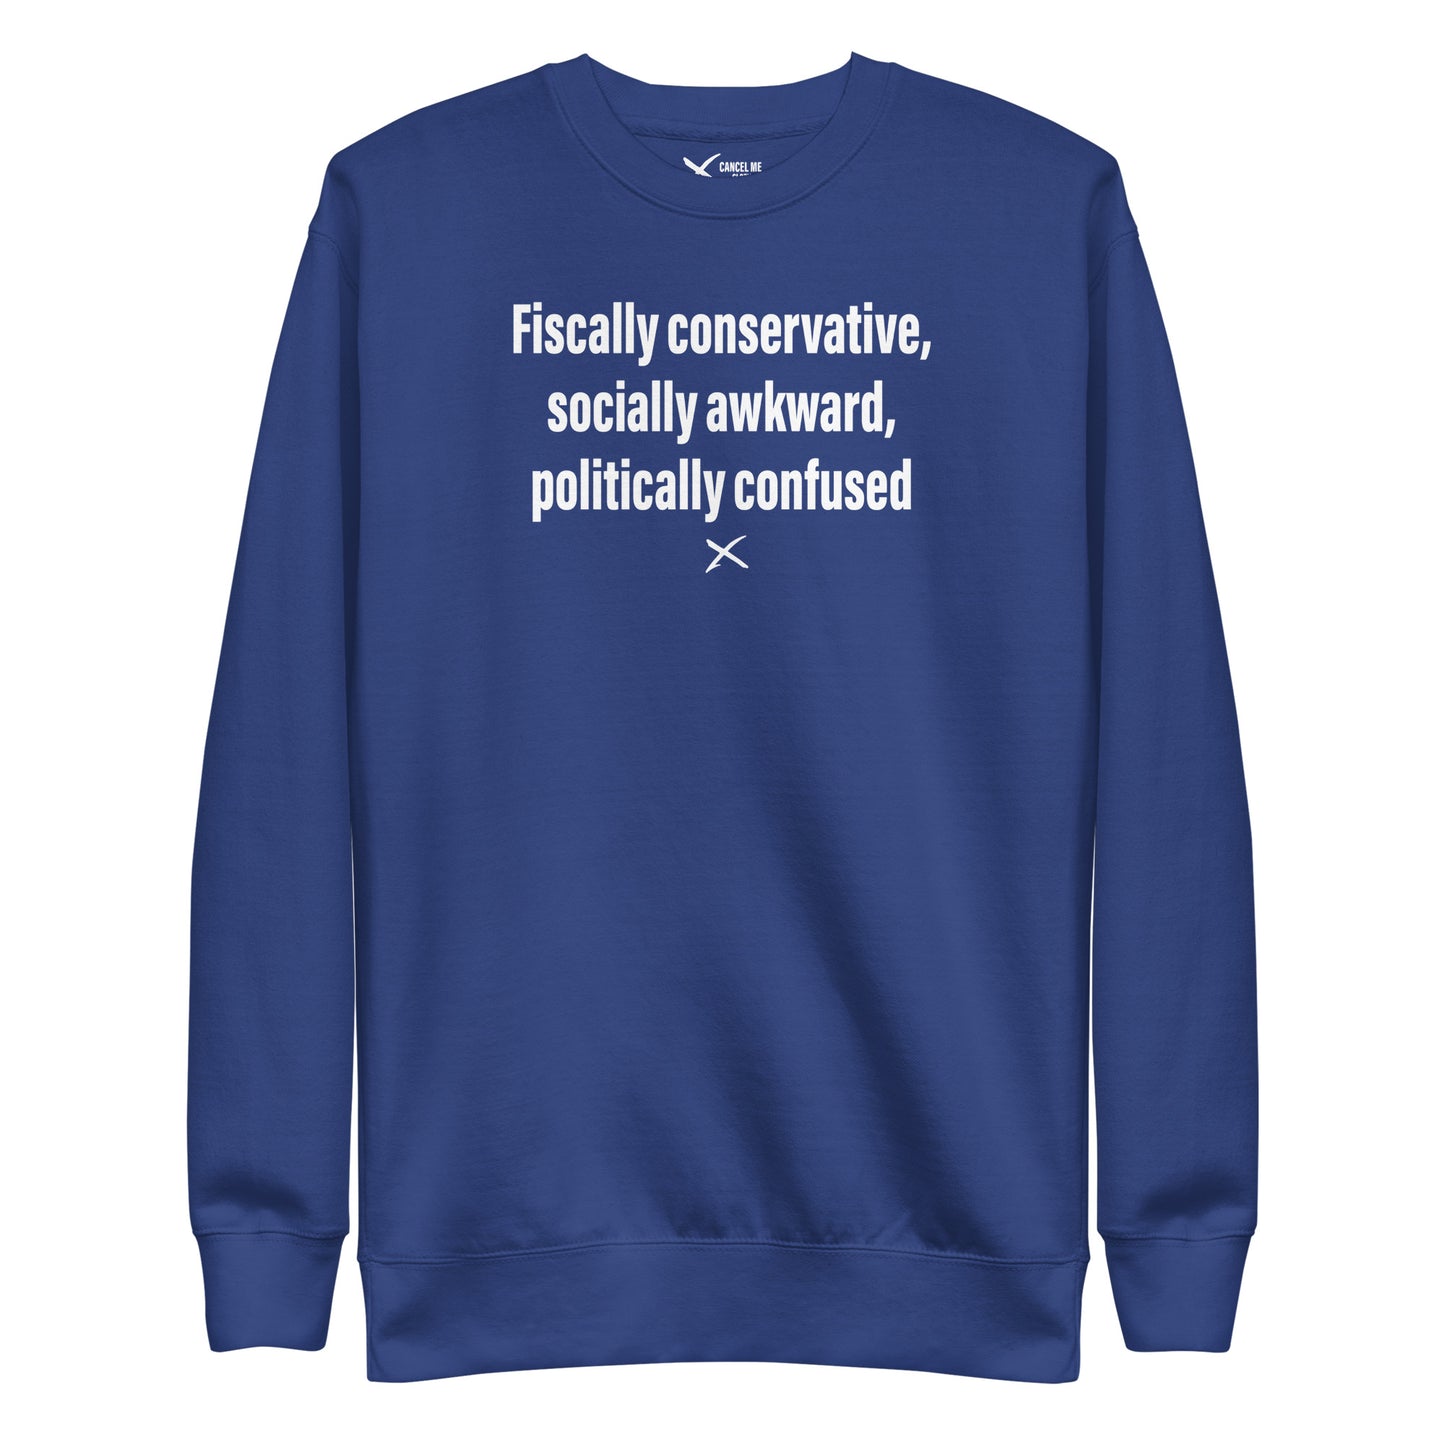 Fiscally conservative, socially awkward, politically confused - Sweatshirt